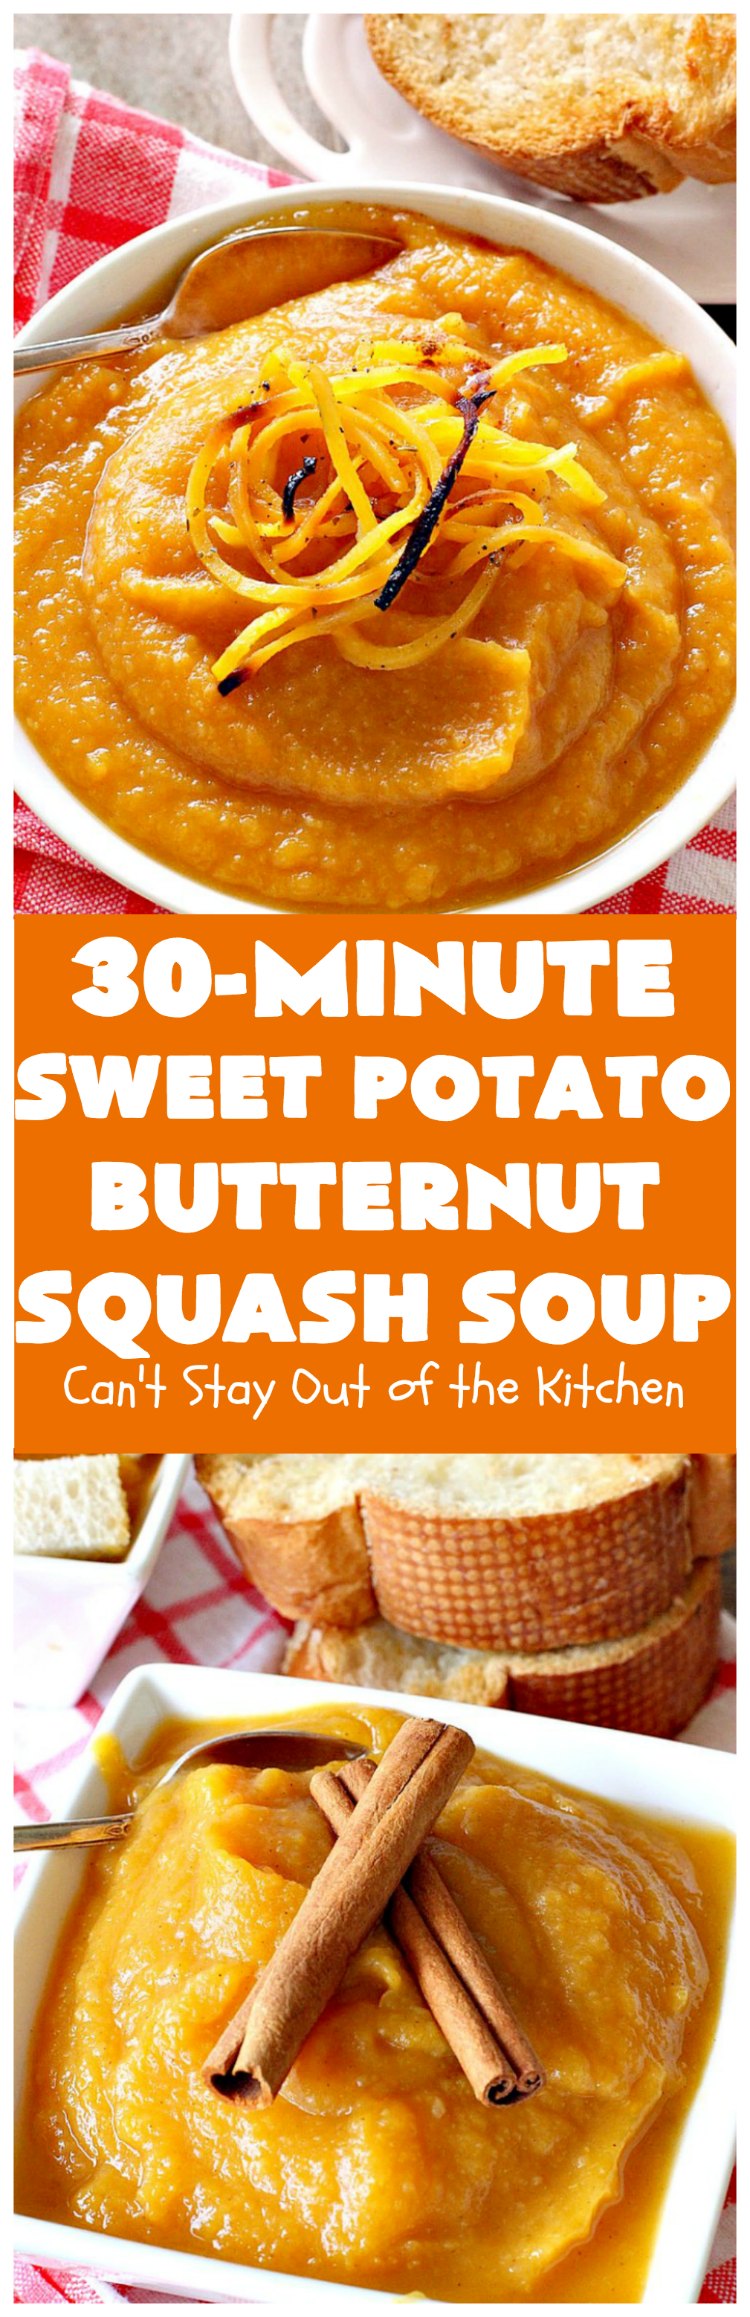 Sweet Potato Butternut Squash Soup | Can't Stay Out of the Kitchen